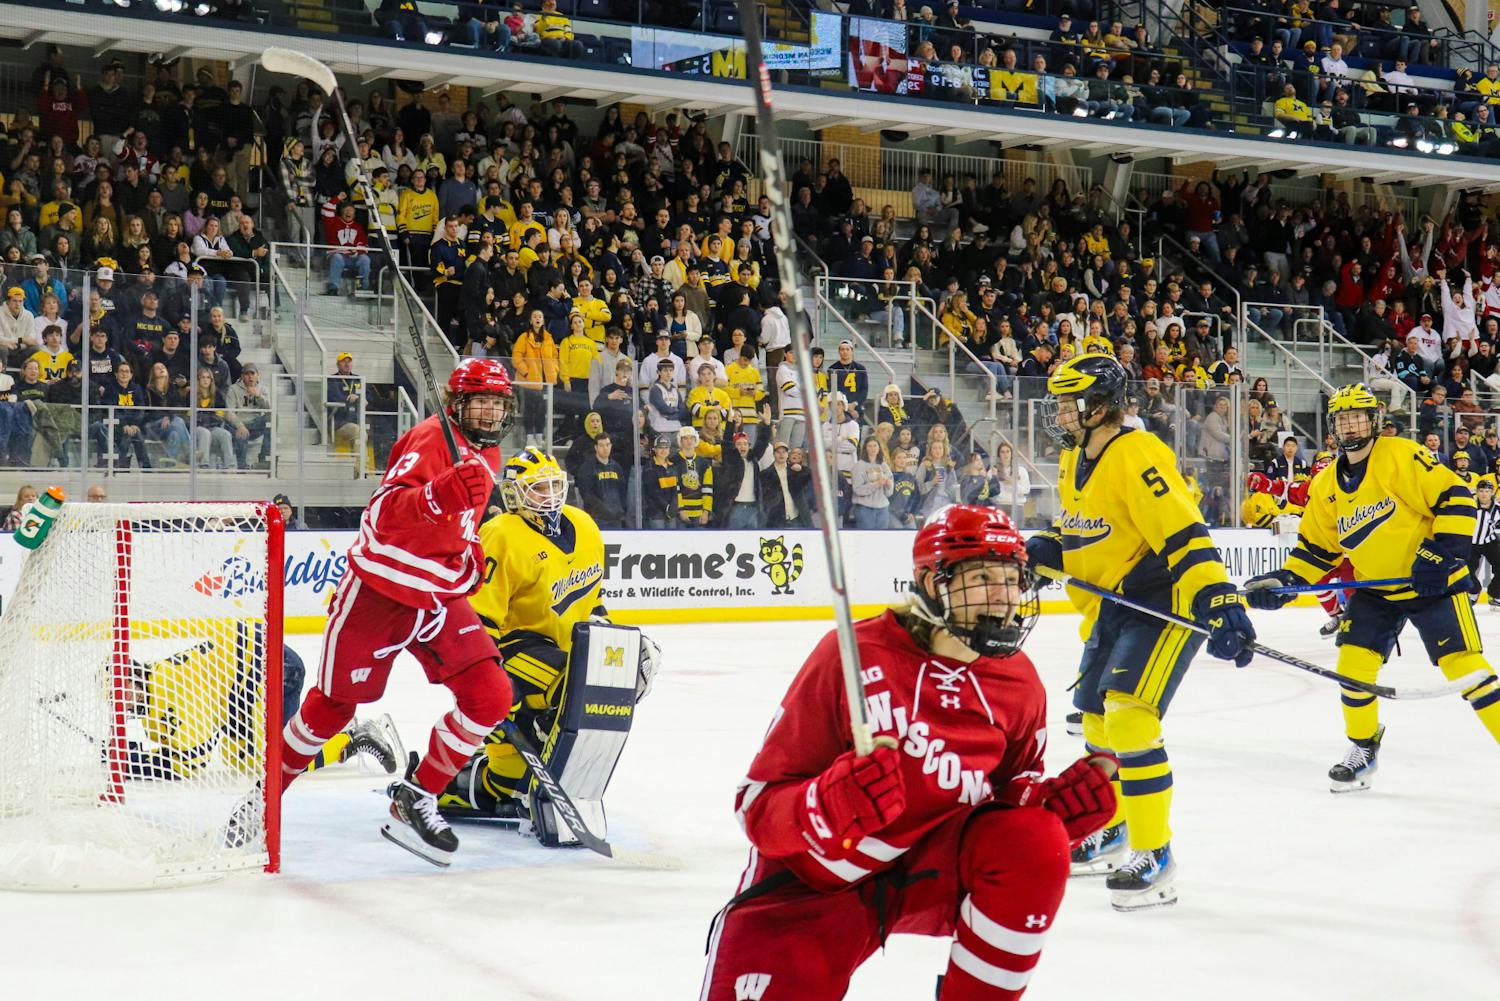 PHOTOS: Badgers far from themselves in significant Michigan defeat